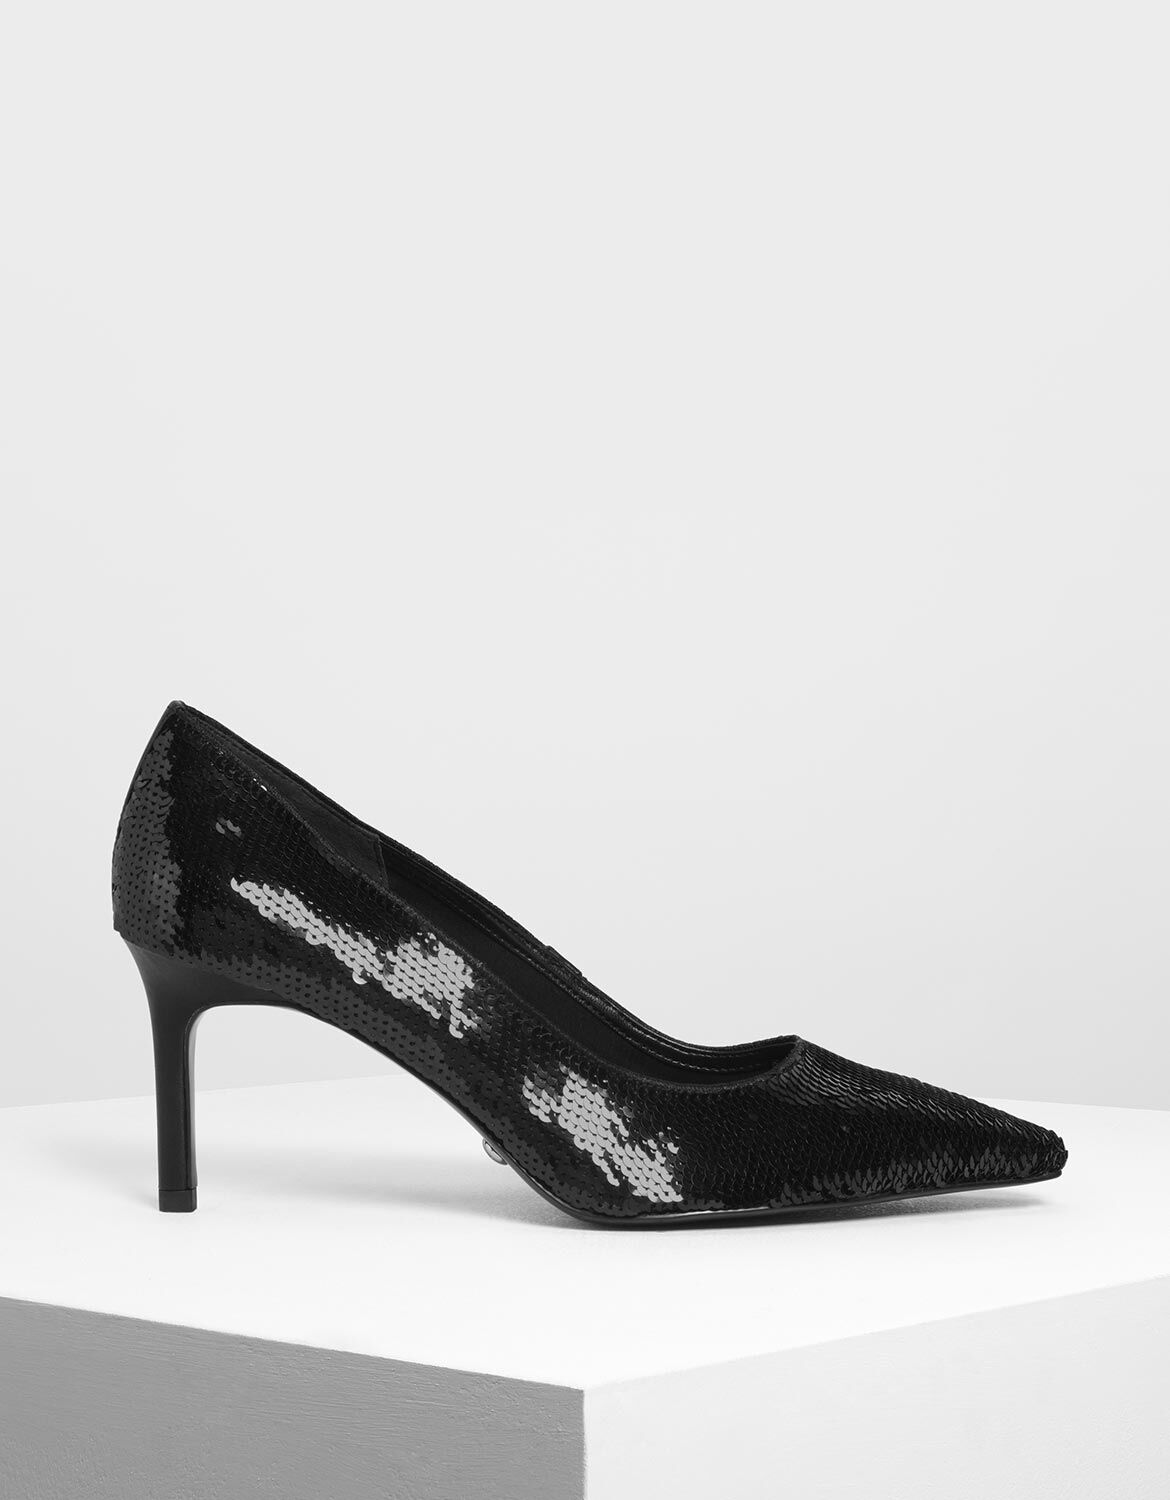 Sequin Mesh Pointed Toe Pumps